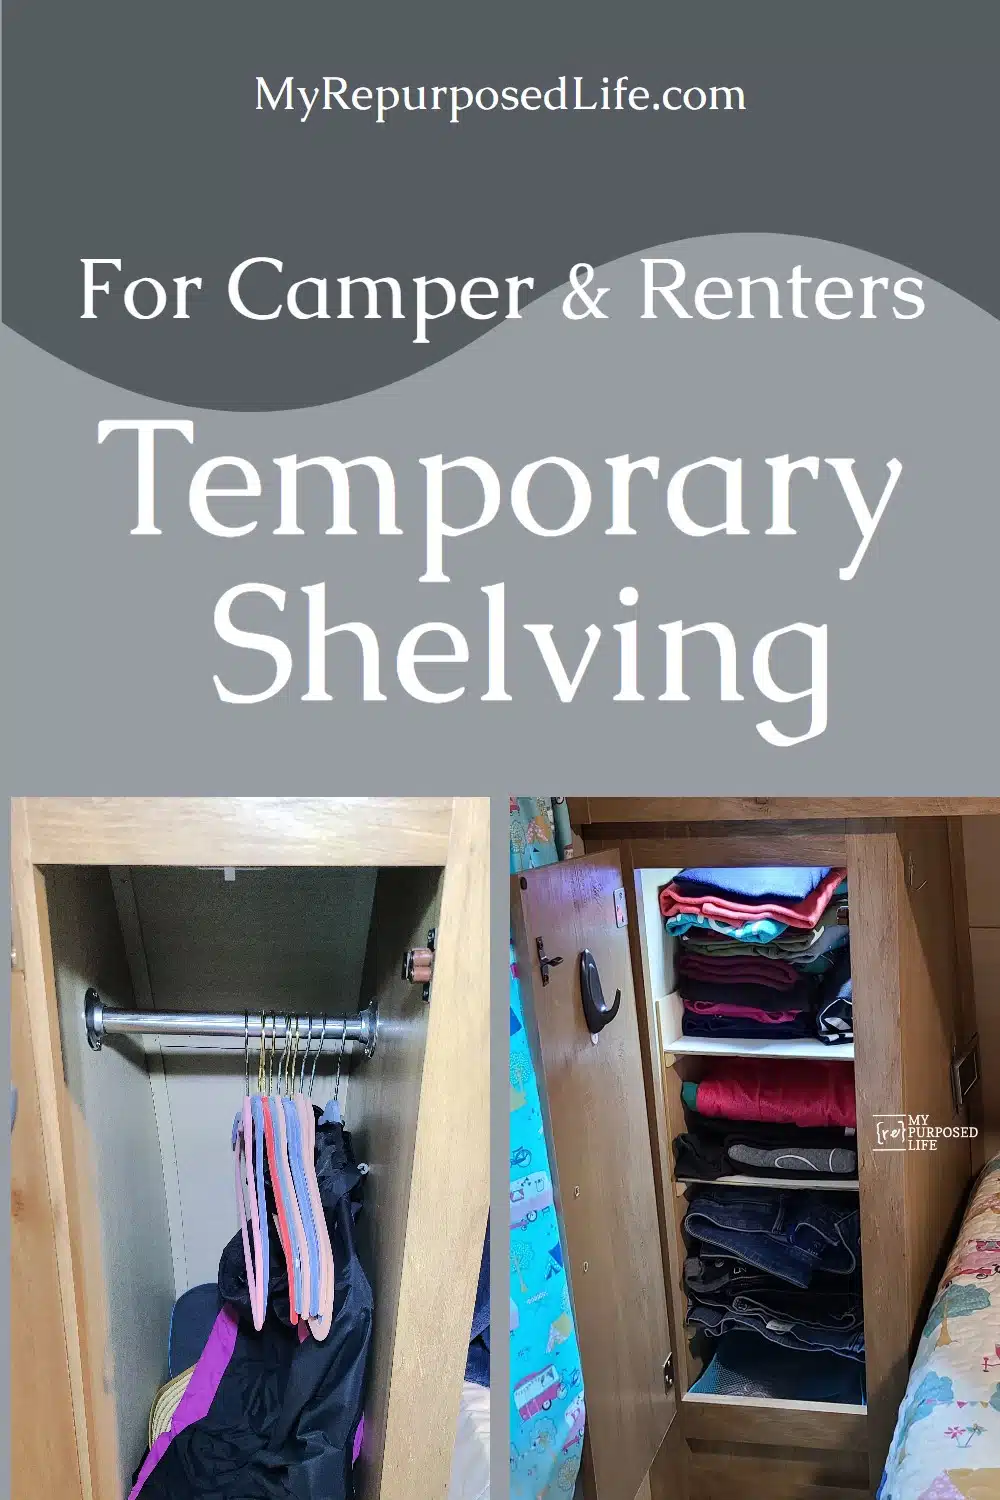 If you have a small closet but need a lot of storage, try these no drill shelves. Step by step directions and tips if you don't have tools. #MyRepurposedLife #DIY #closet #shelves #renters #campers via @repurposedlife